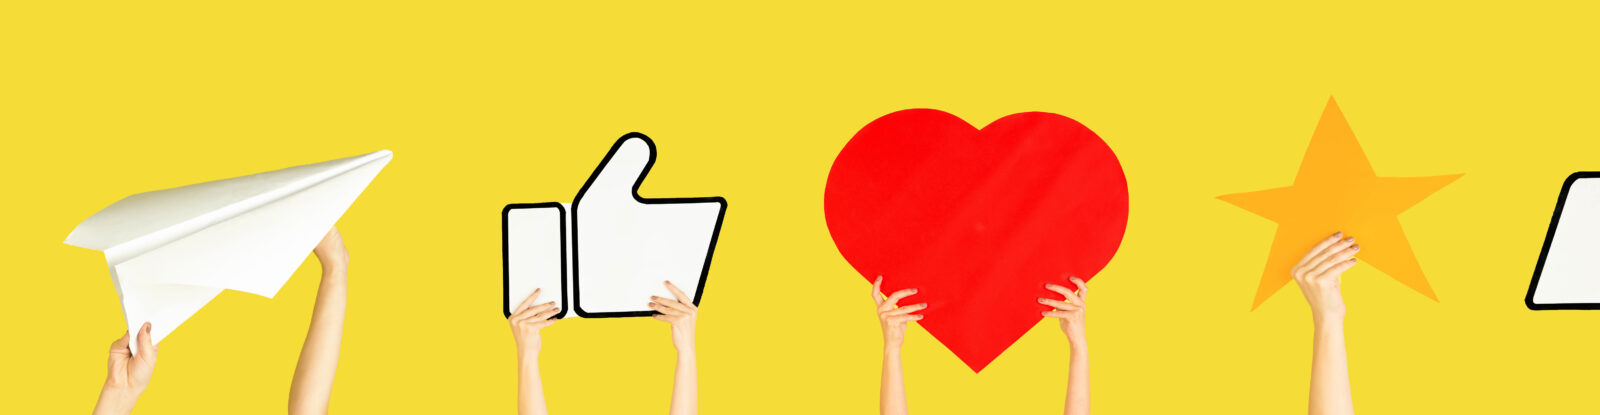 Social media icons for messaging, sent, thumbs up, heart, star, and thumbs down.